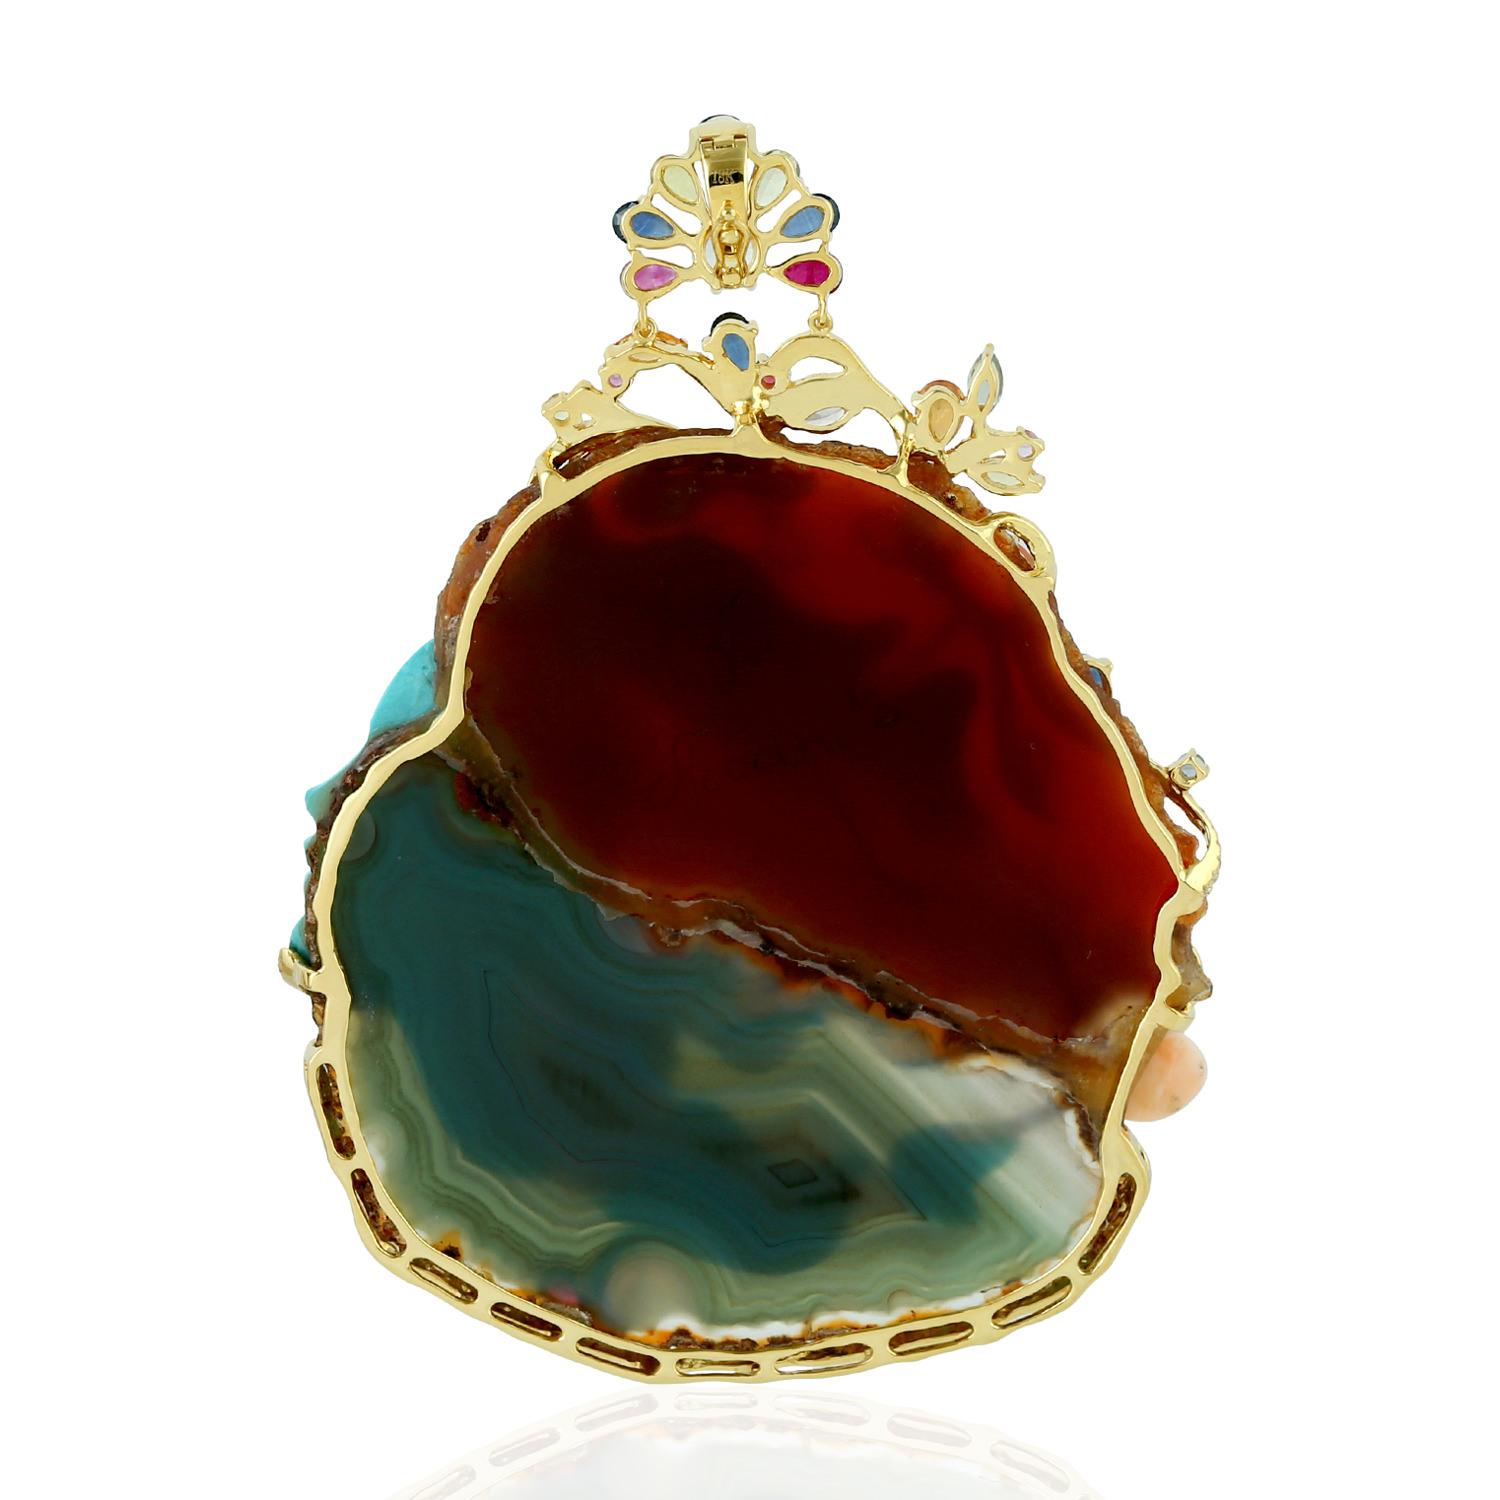 Cast in 18 Karat gold, this beautiful pendant features 196.39 carats of carved multi gemstone, 5.24 carats sapphire, .79 carats ruby & 2.0 carats of sparkling diamonds.  

FOLLOW  MEGHNA JEWELS storefront to view the latest collection & exclusive